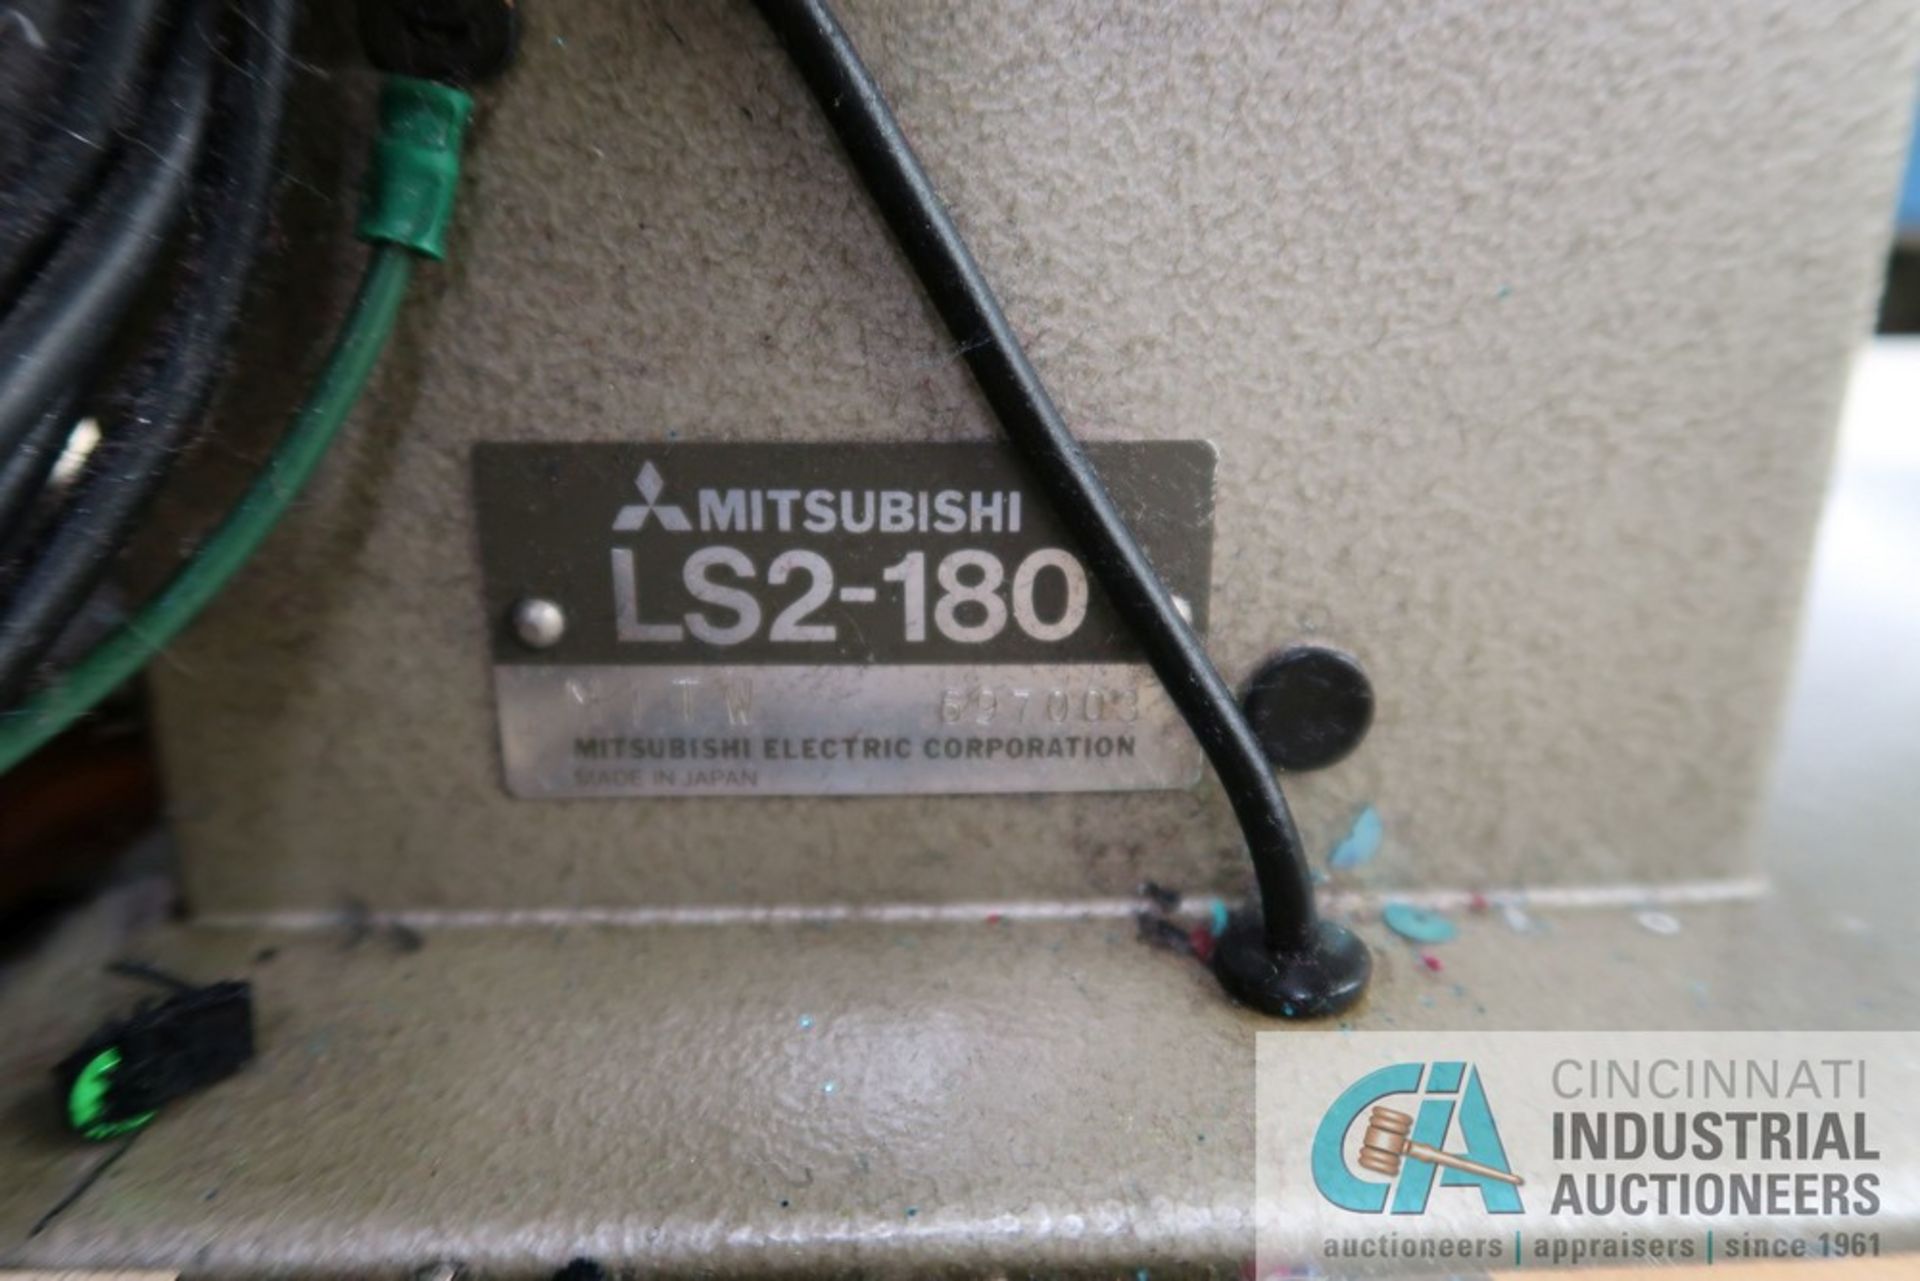 **MITSUBISHI MODEL LS2-180 SINGLE NEEDLE SEWING MACHINE** Located at 1st Location - Prospect Rd - Image 6 of 6